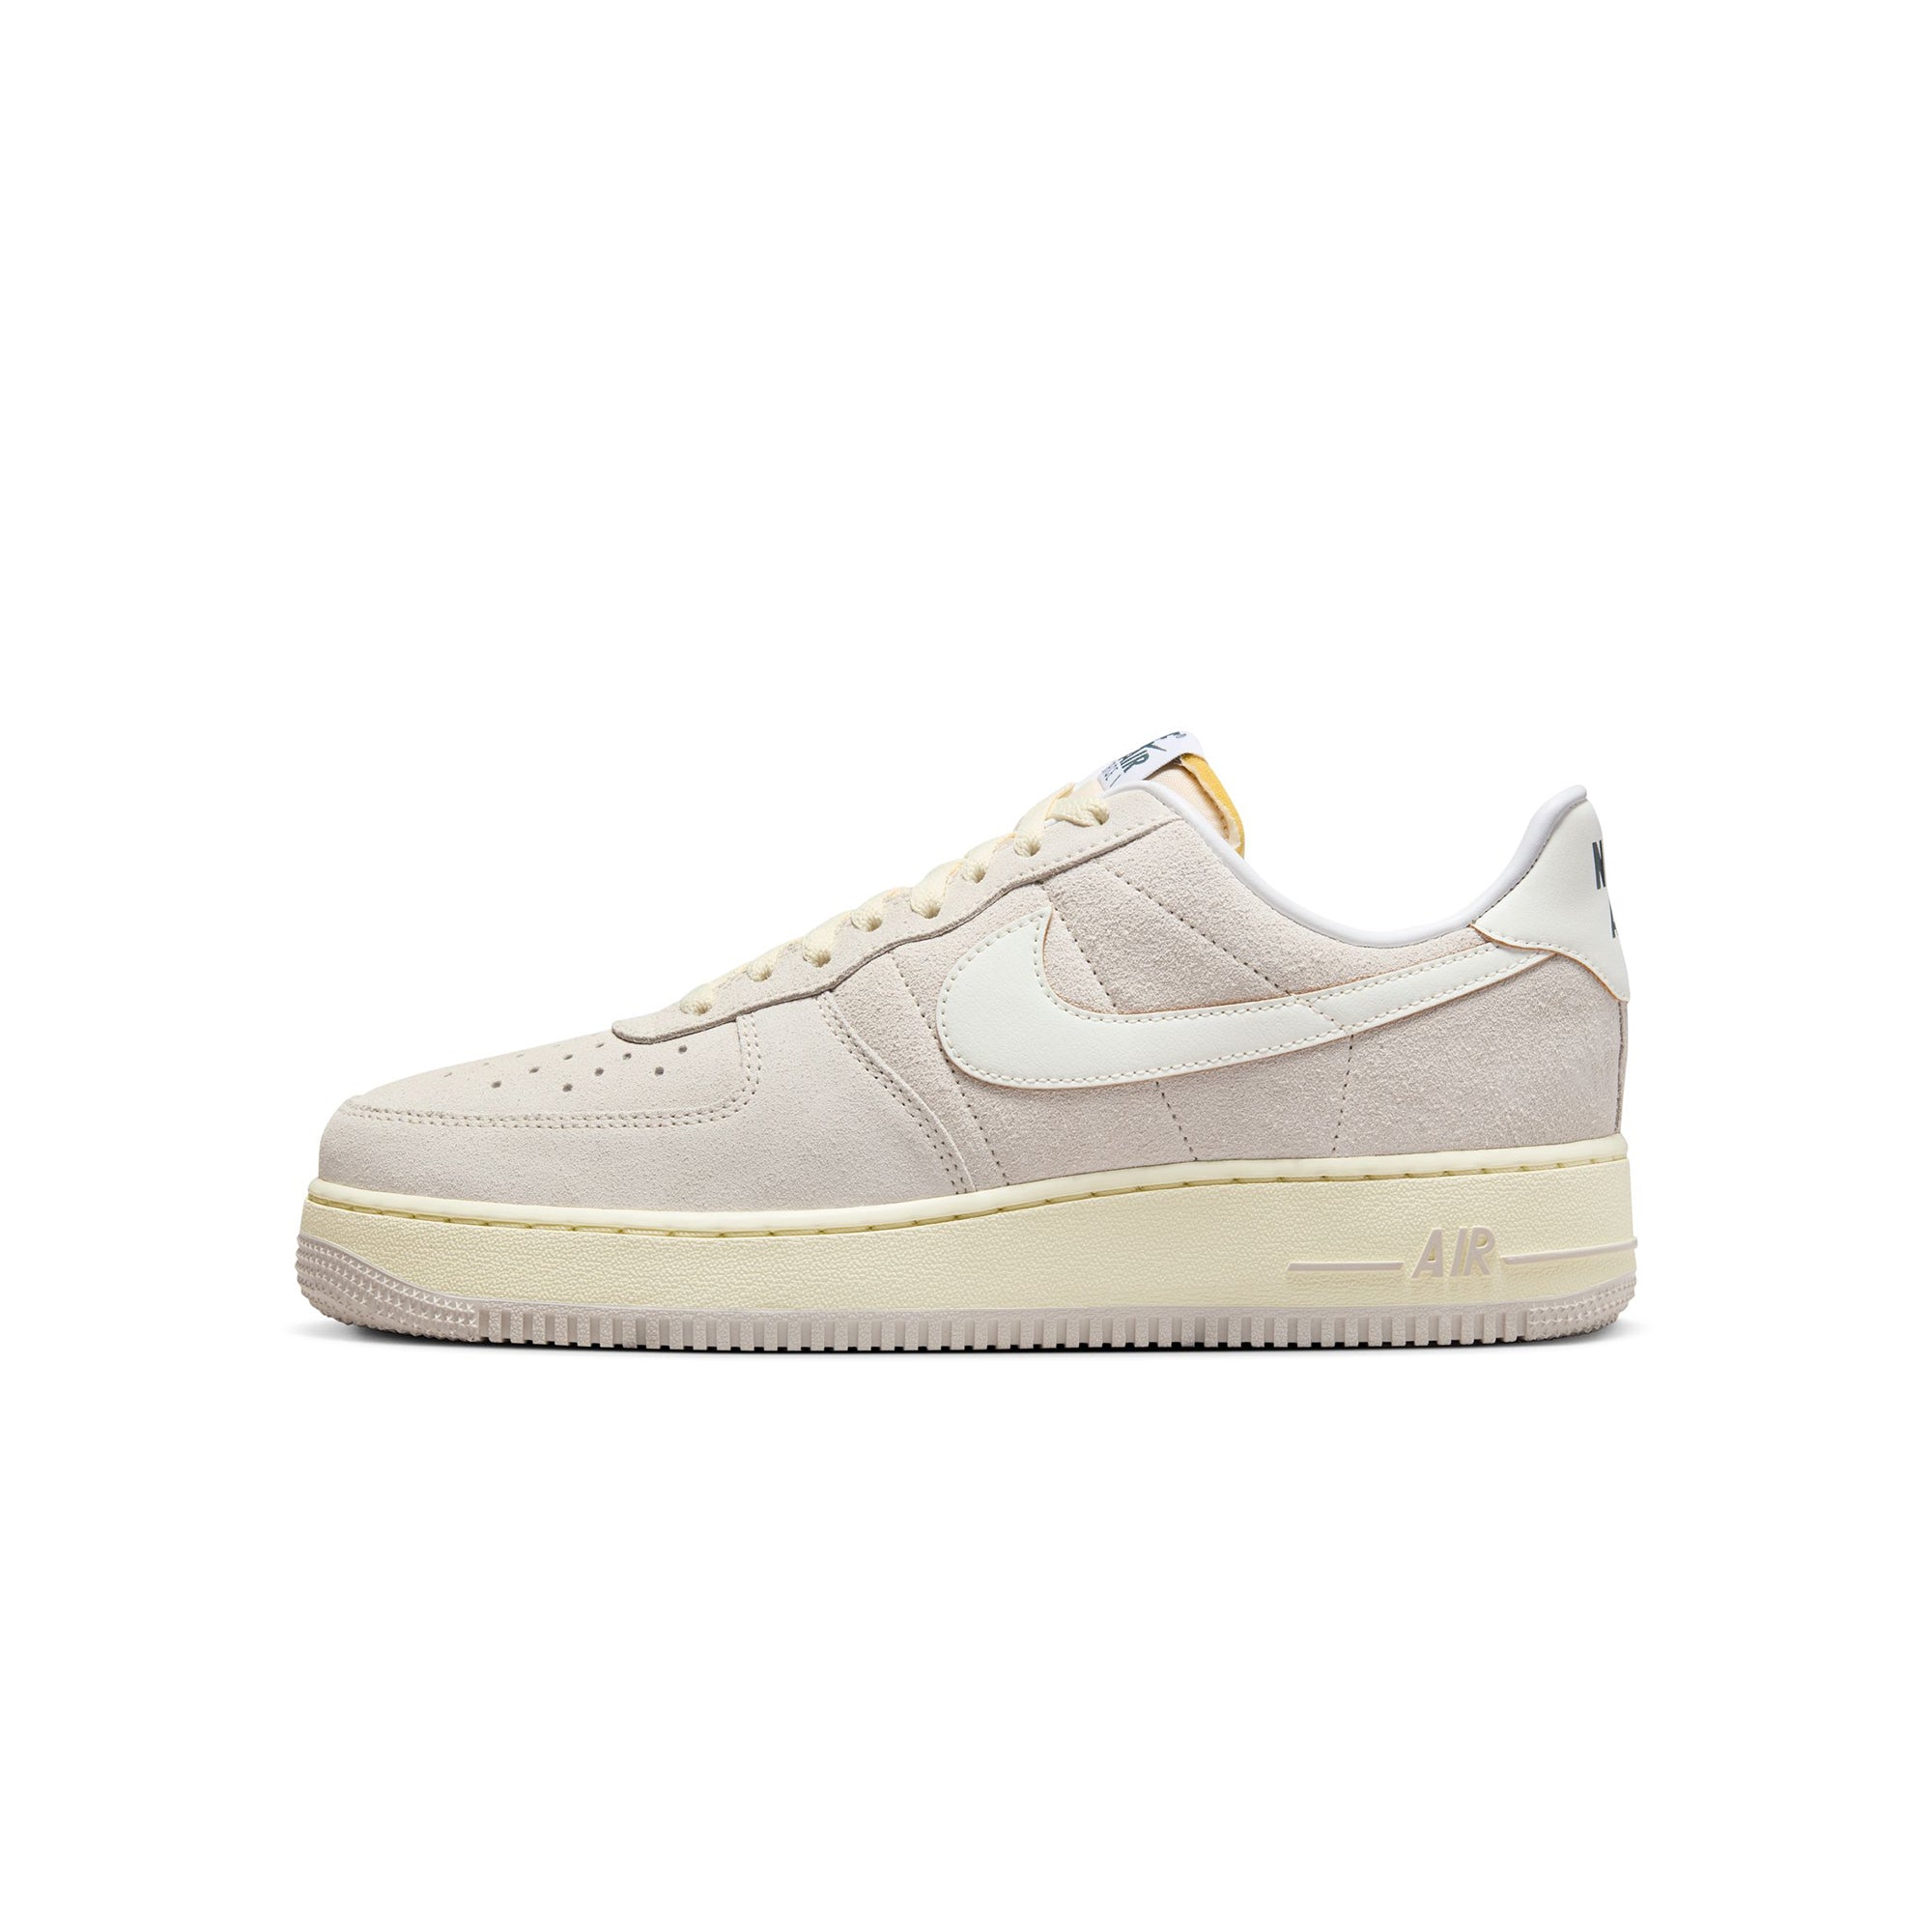 Nike Mens Air Force 1 '07 Shoes card image